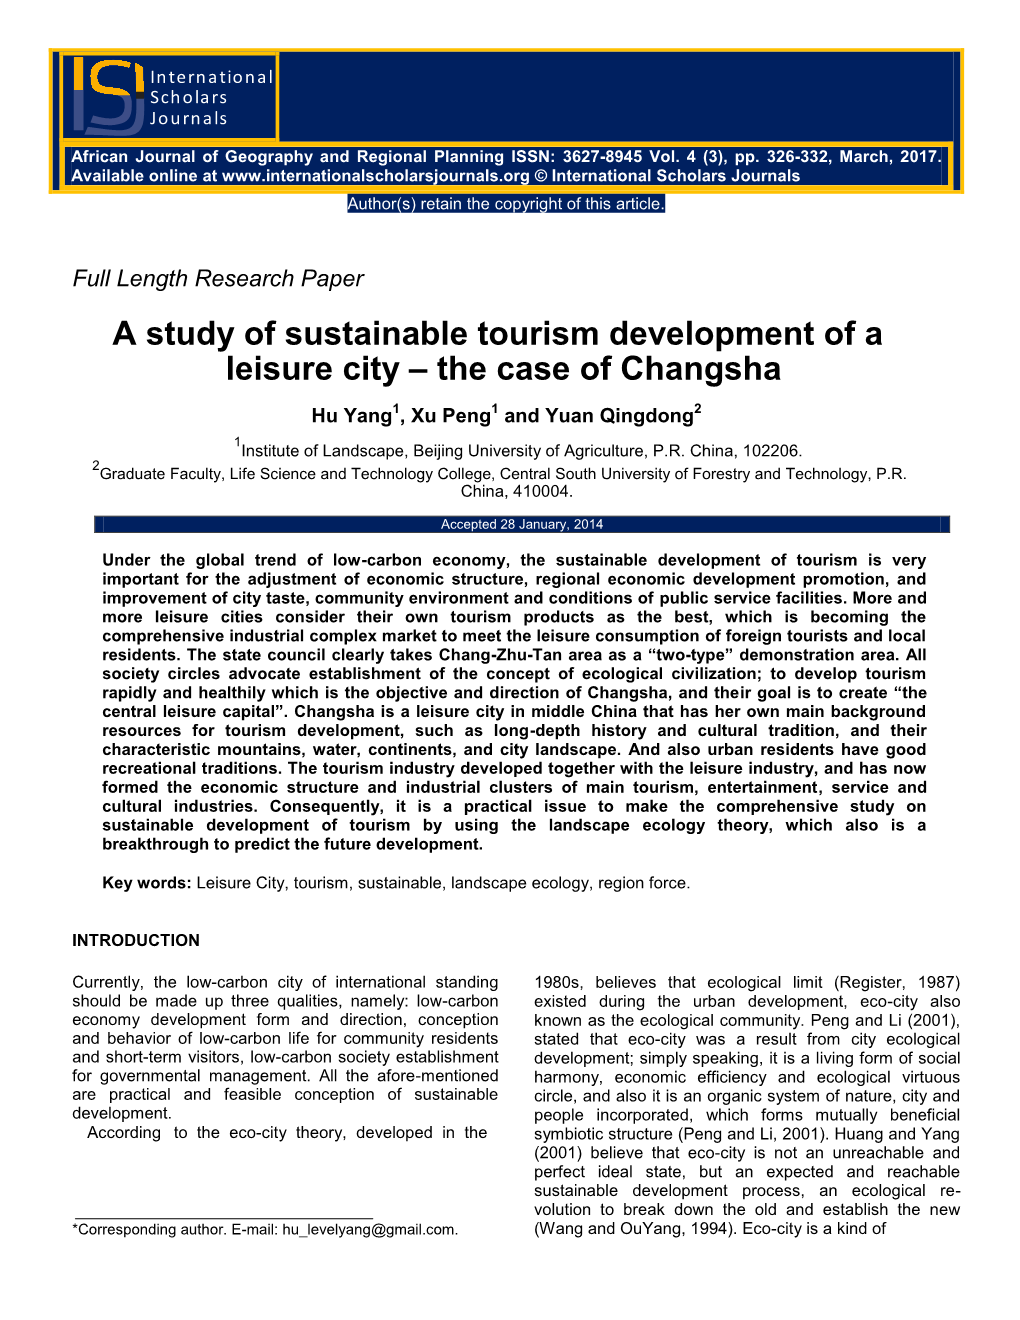 A Study of Sustainable Tourism Development of a Leisure City – the Case of Changsha